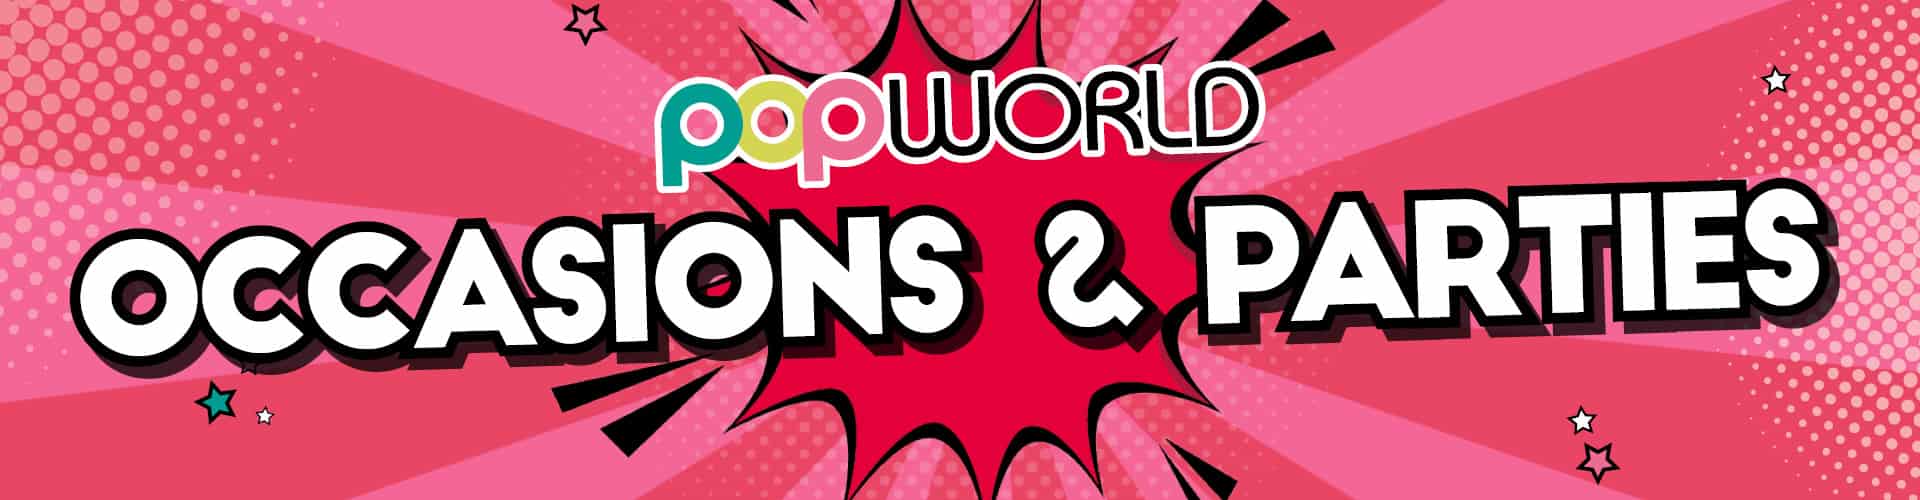 Occasions and Parties at Popworld Manchester